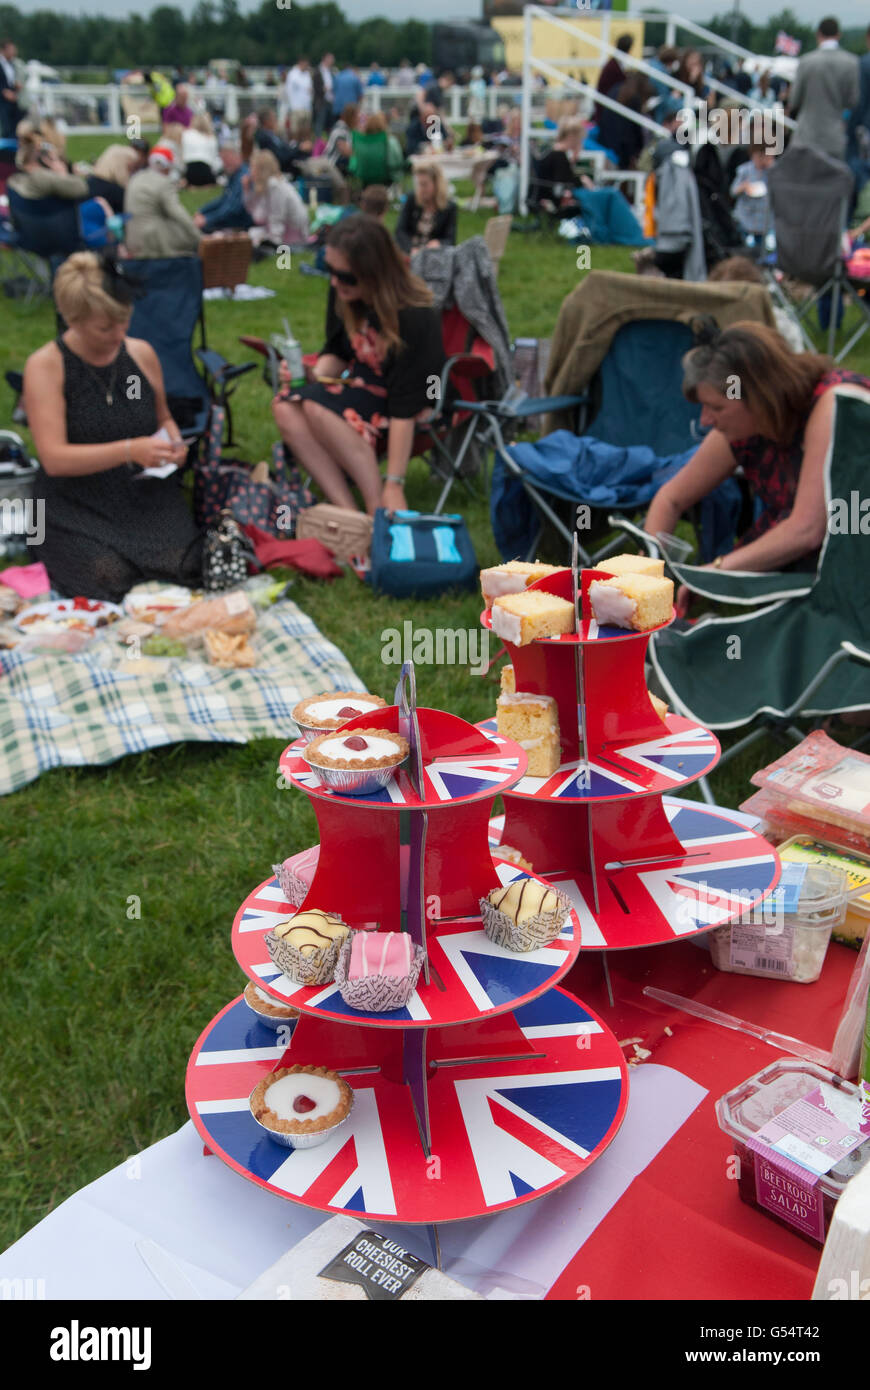 Picnic food Union Jack cake stands at Royal Ascot people in a crowd having a day off away from the office 2010s 2016. UK HOMER SYKES Stock Photo